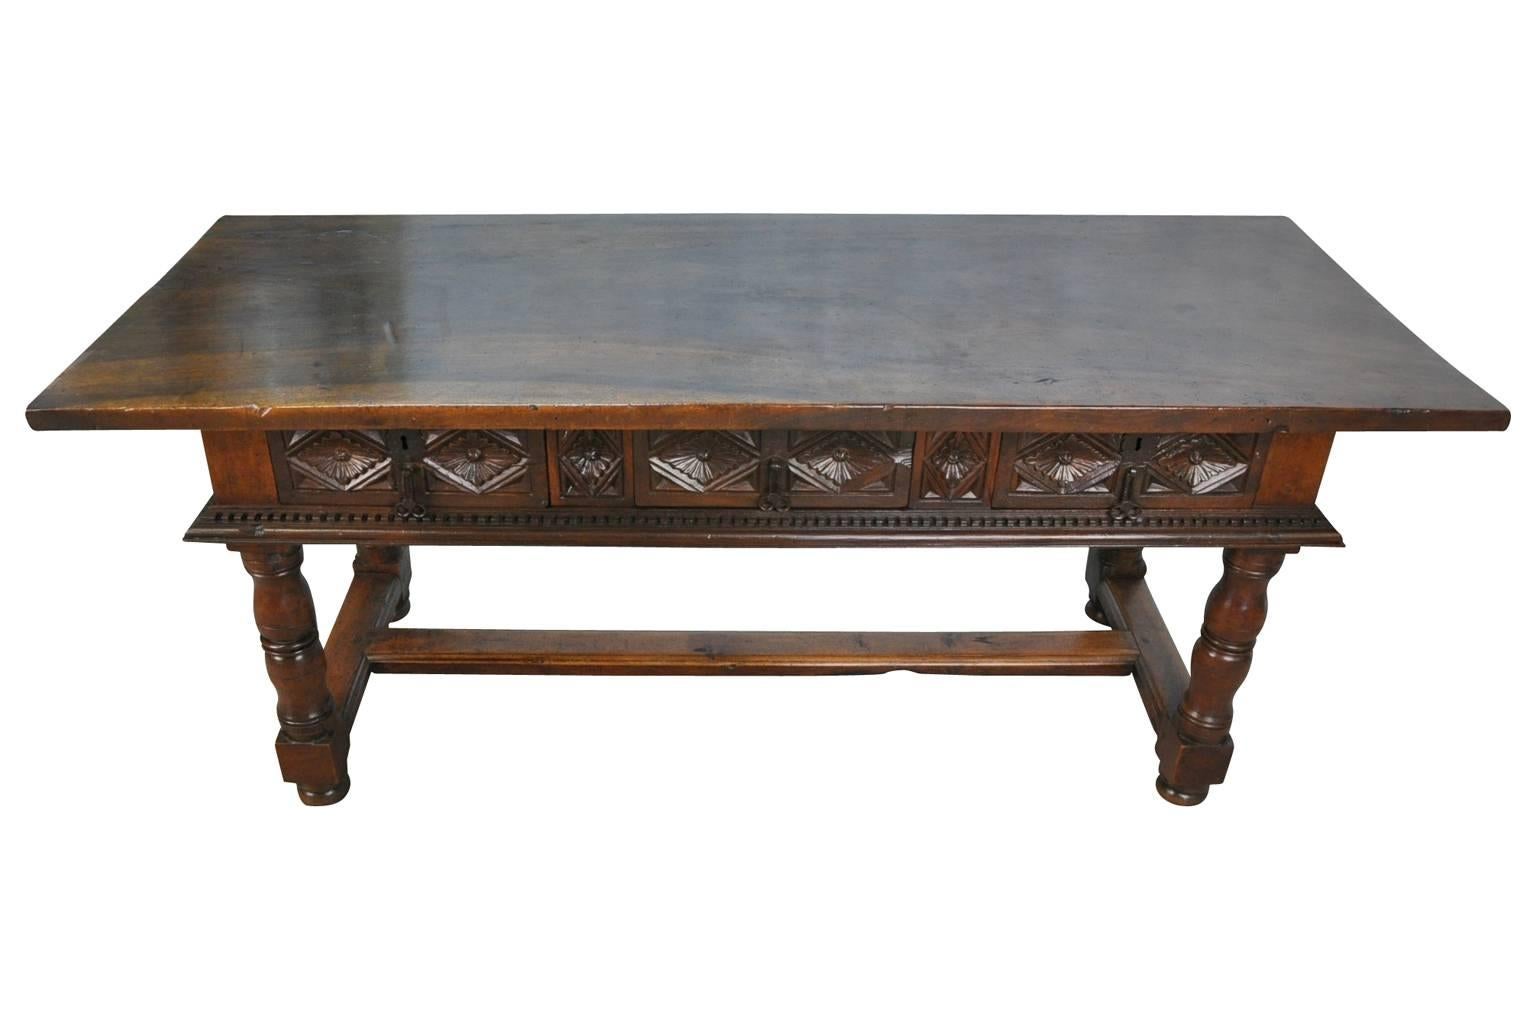 An outstanding 18th century Reflectoire table or desk from the Catalan region of Spain. Masterly constructed from walnut with a stunning solid board top. Wonderful patina.... This table serves beautifully not only as a writing table, but as a